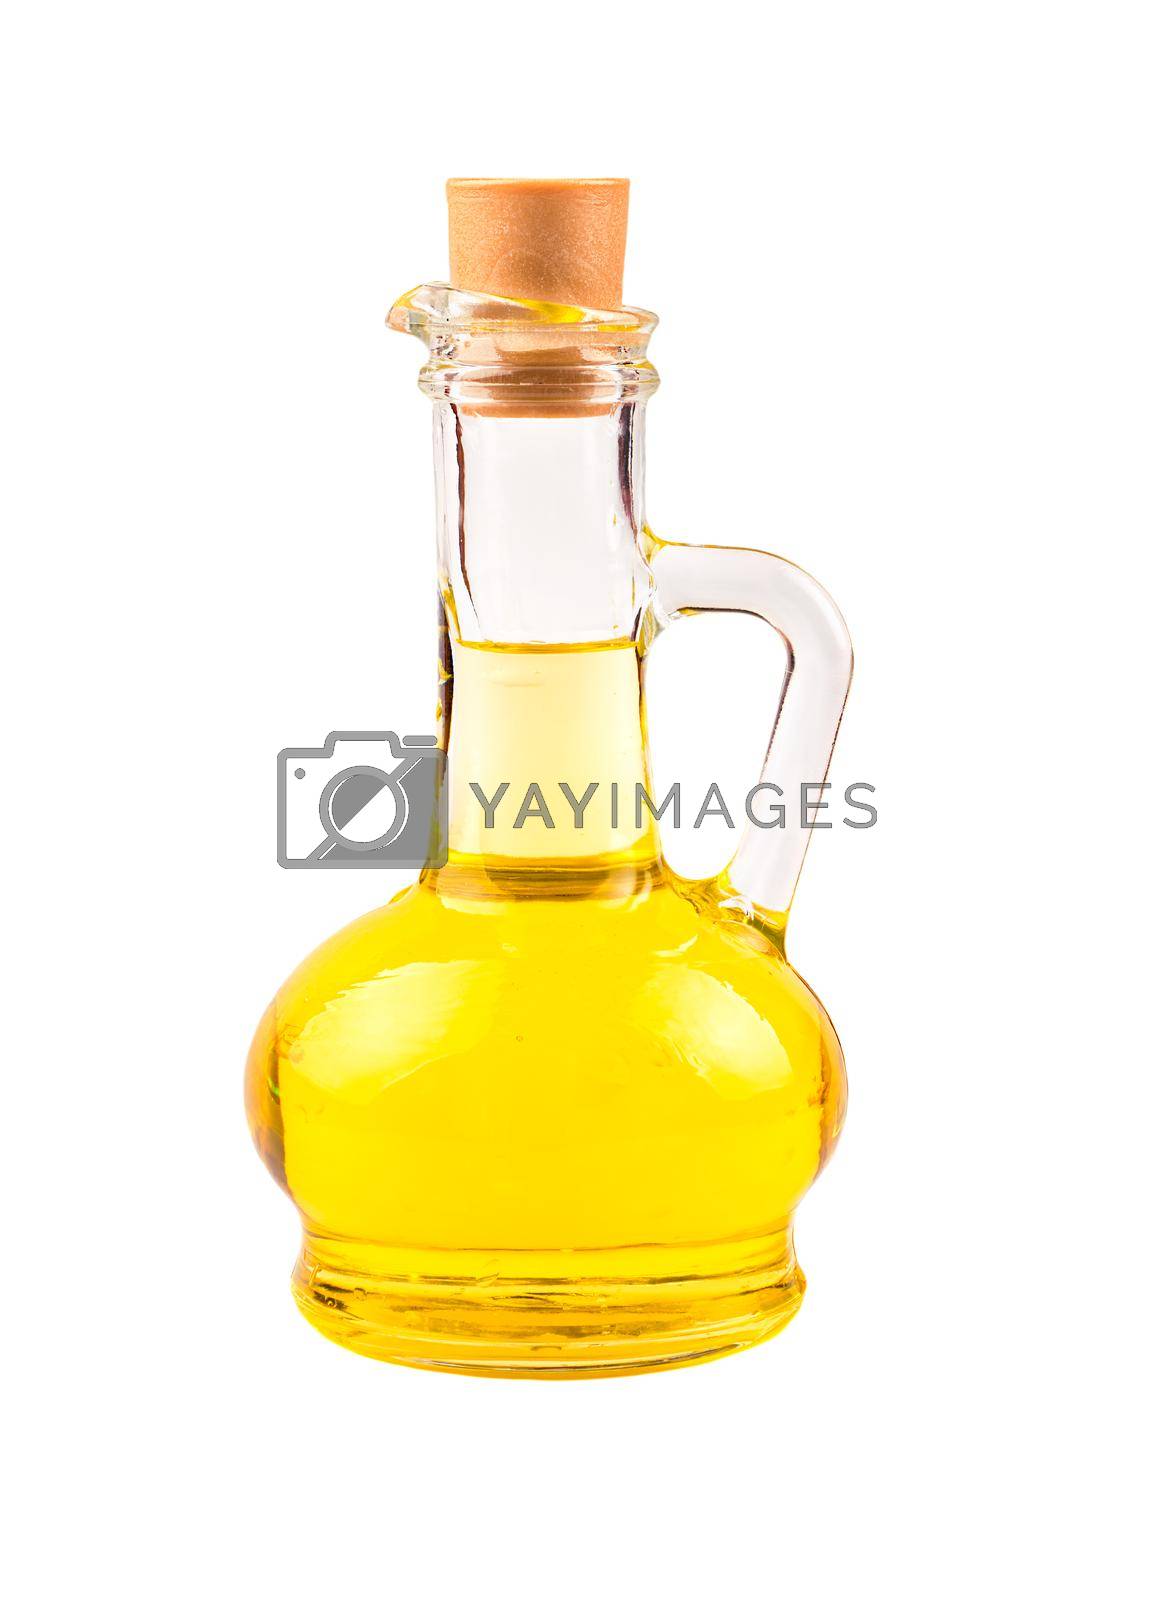 Royalty free image of Sunflower oil by andregric